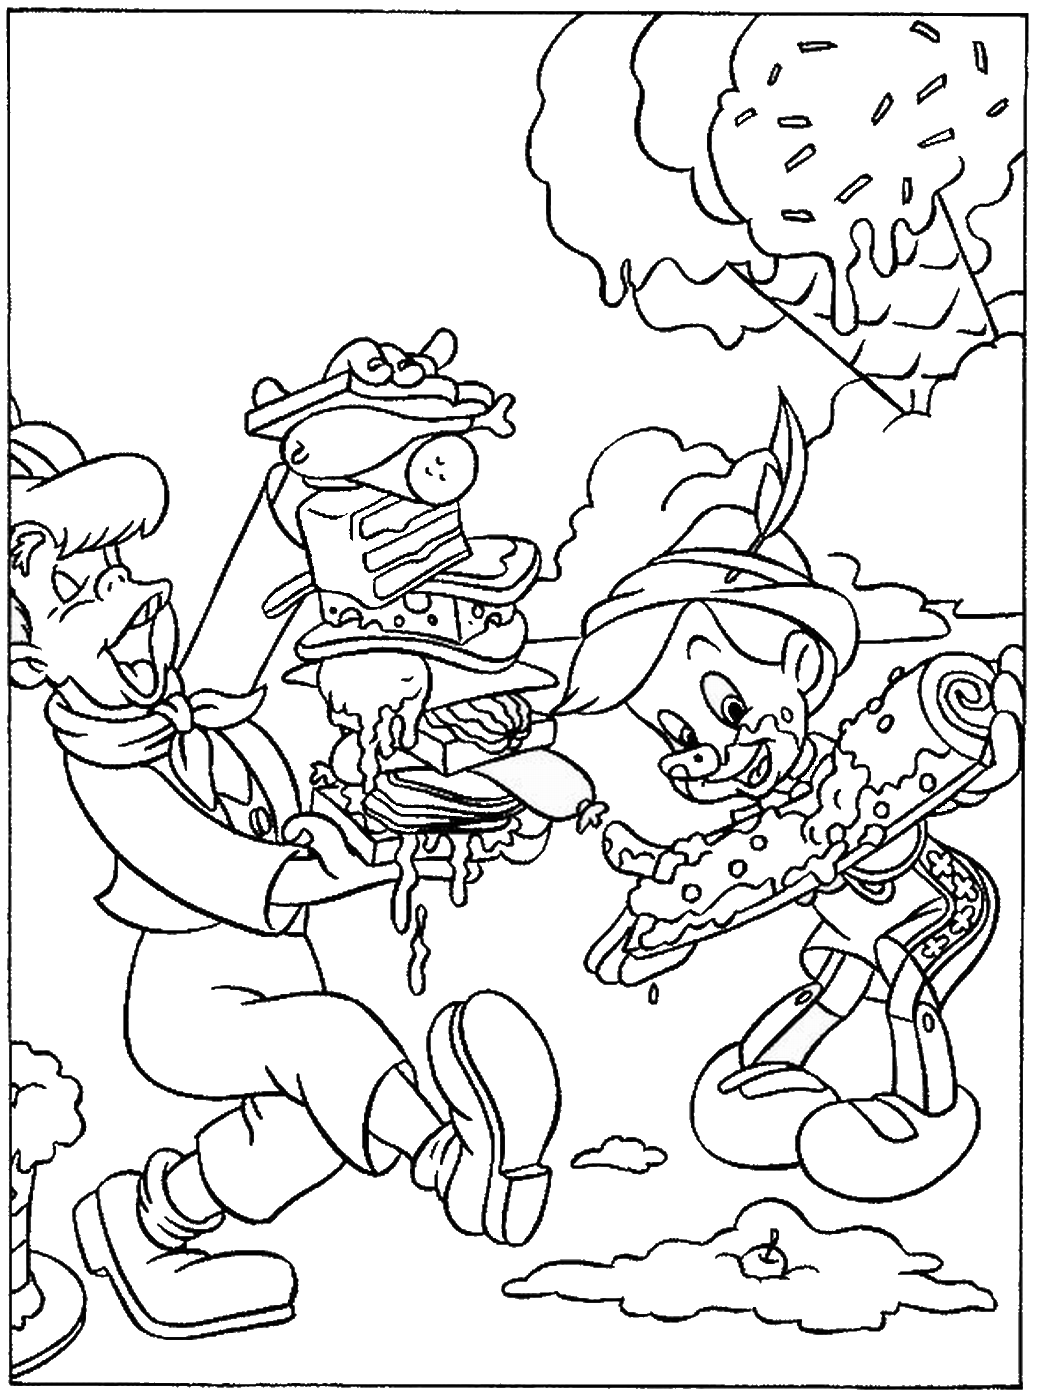 Pinocchio Coloring Pages TV Film Pinocchio_coloring_4 Printable 2020 06334 Coloring4free